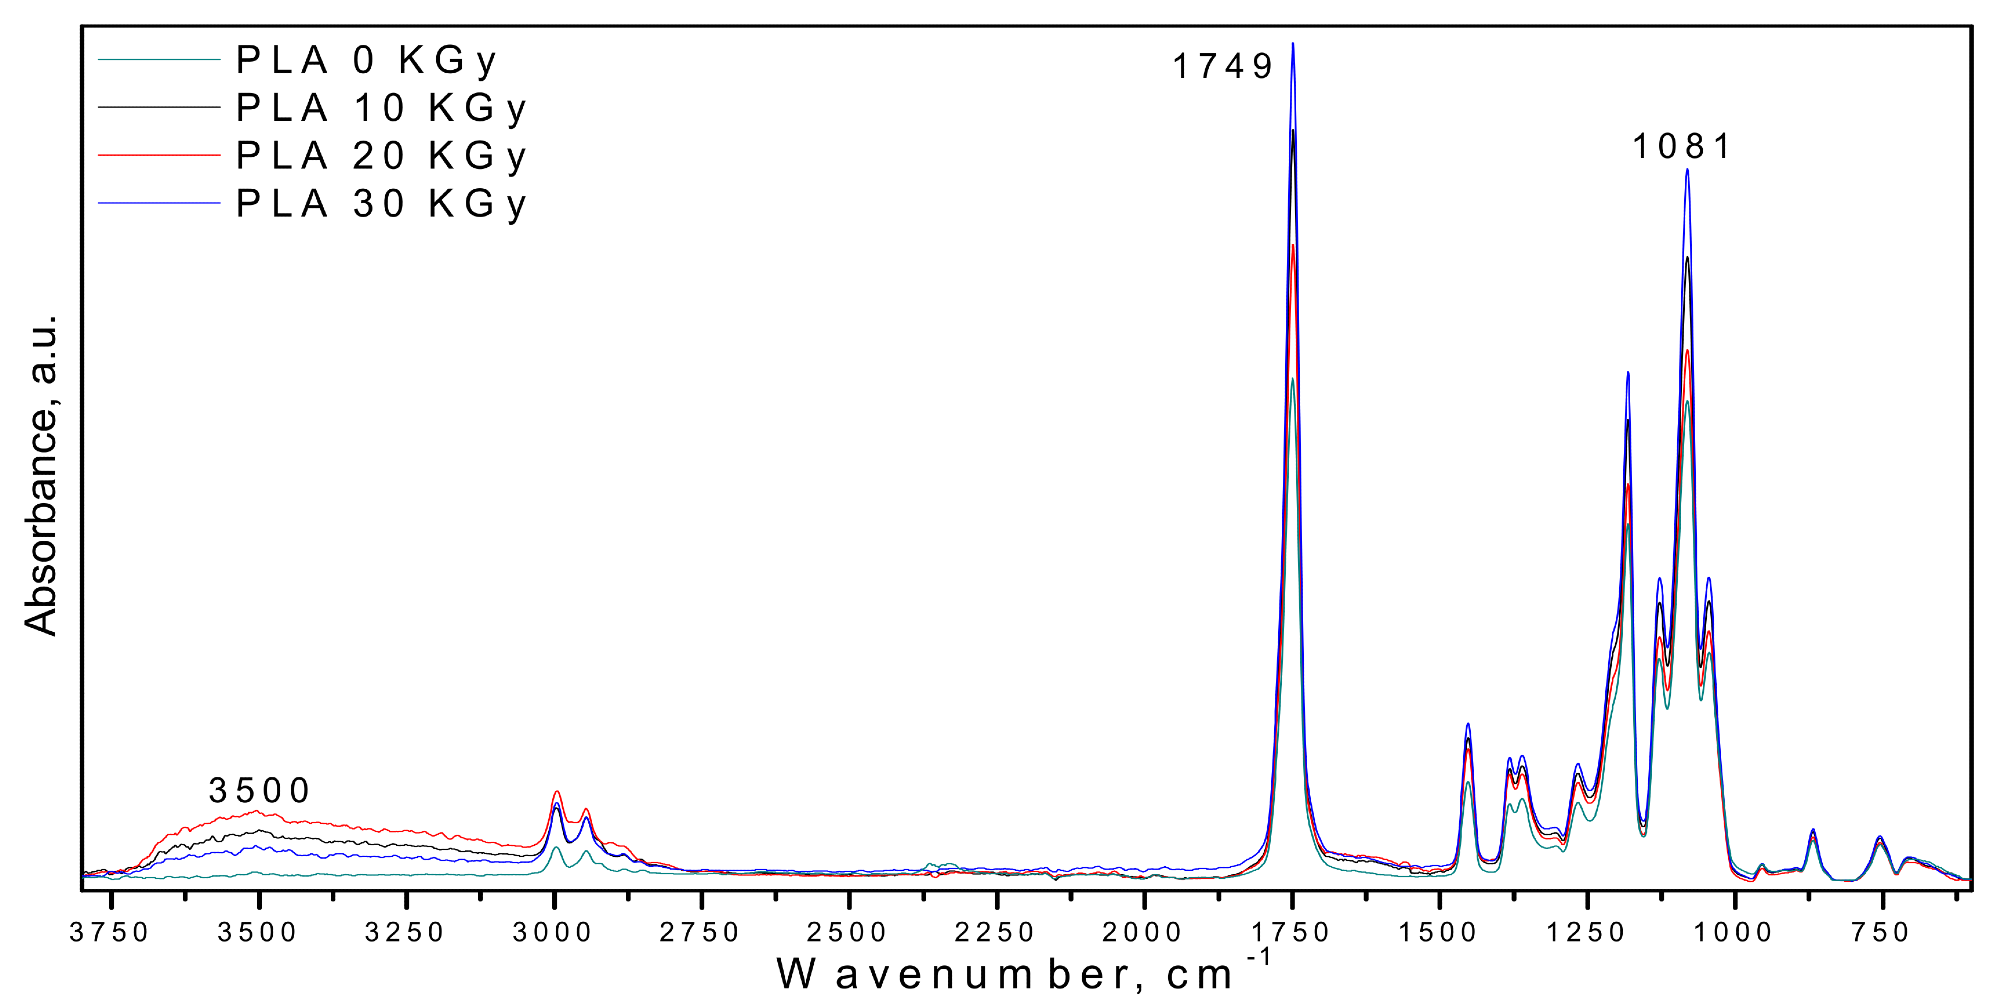 FTIR spectra of PLA at gamma irradiation doses of 0, 10, 20, and 30 kGy.